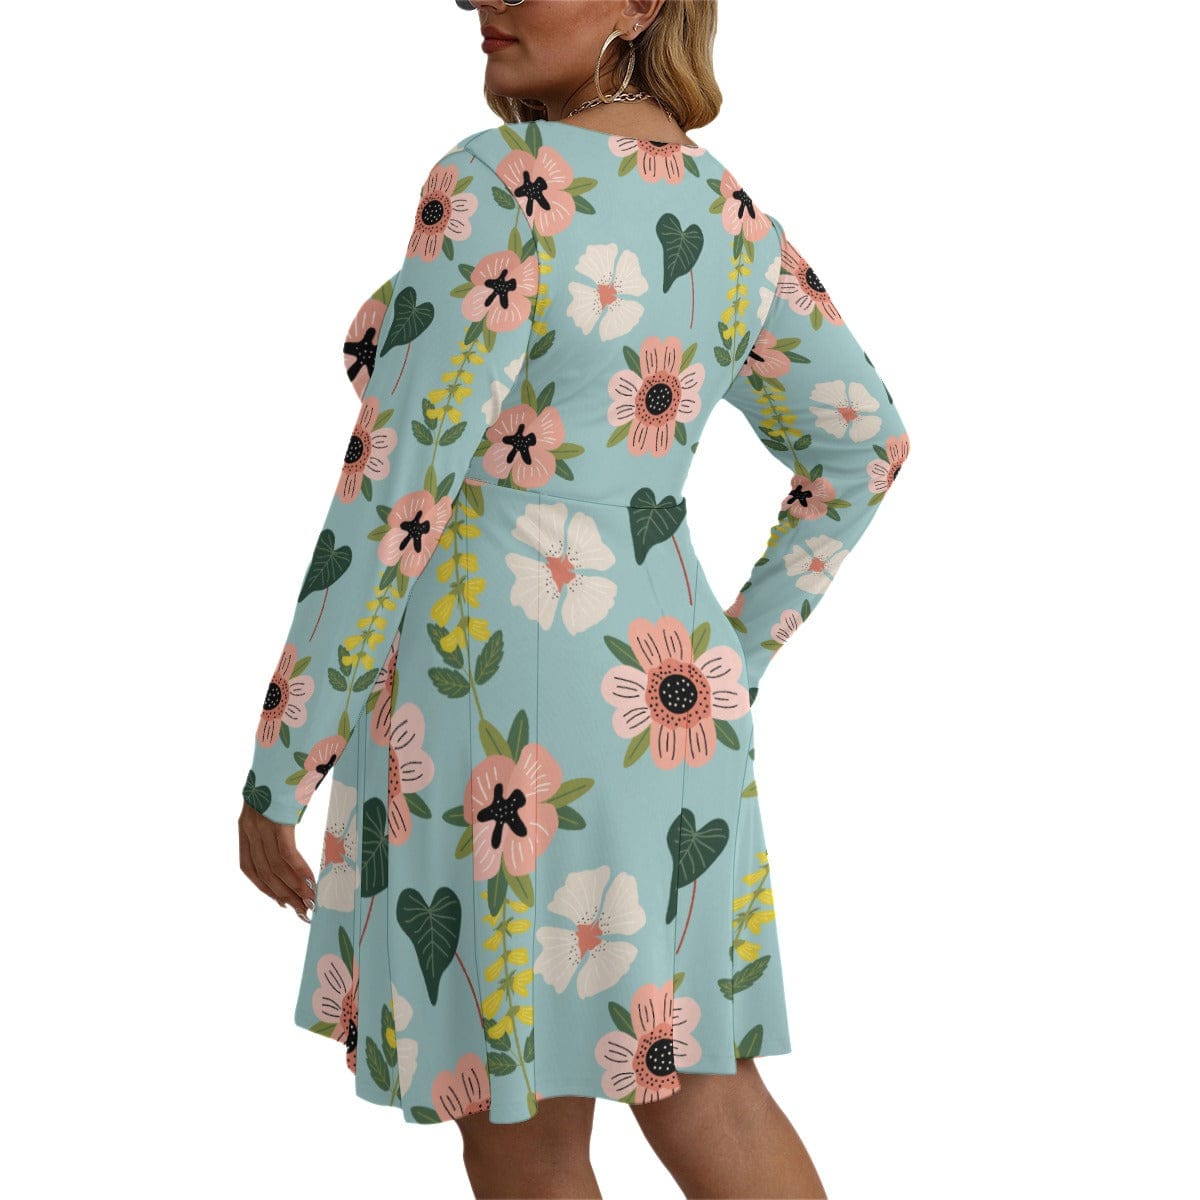 Yoycol All-Over Print Women's V-neck Long Sleeve Dress(Plus Size)